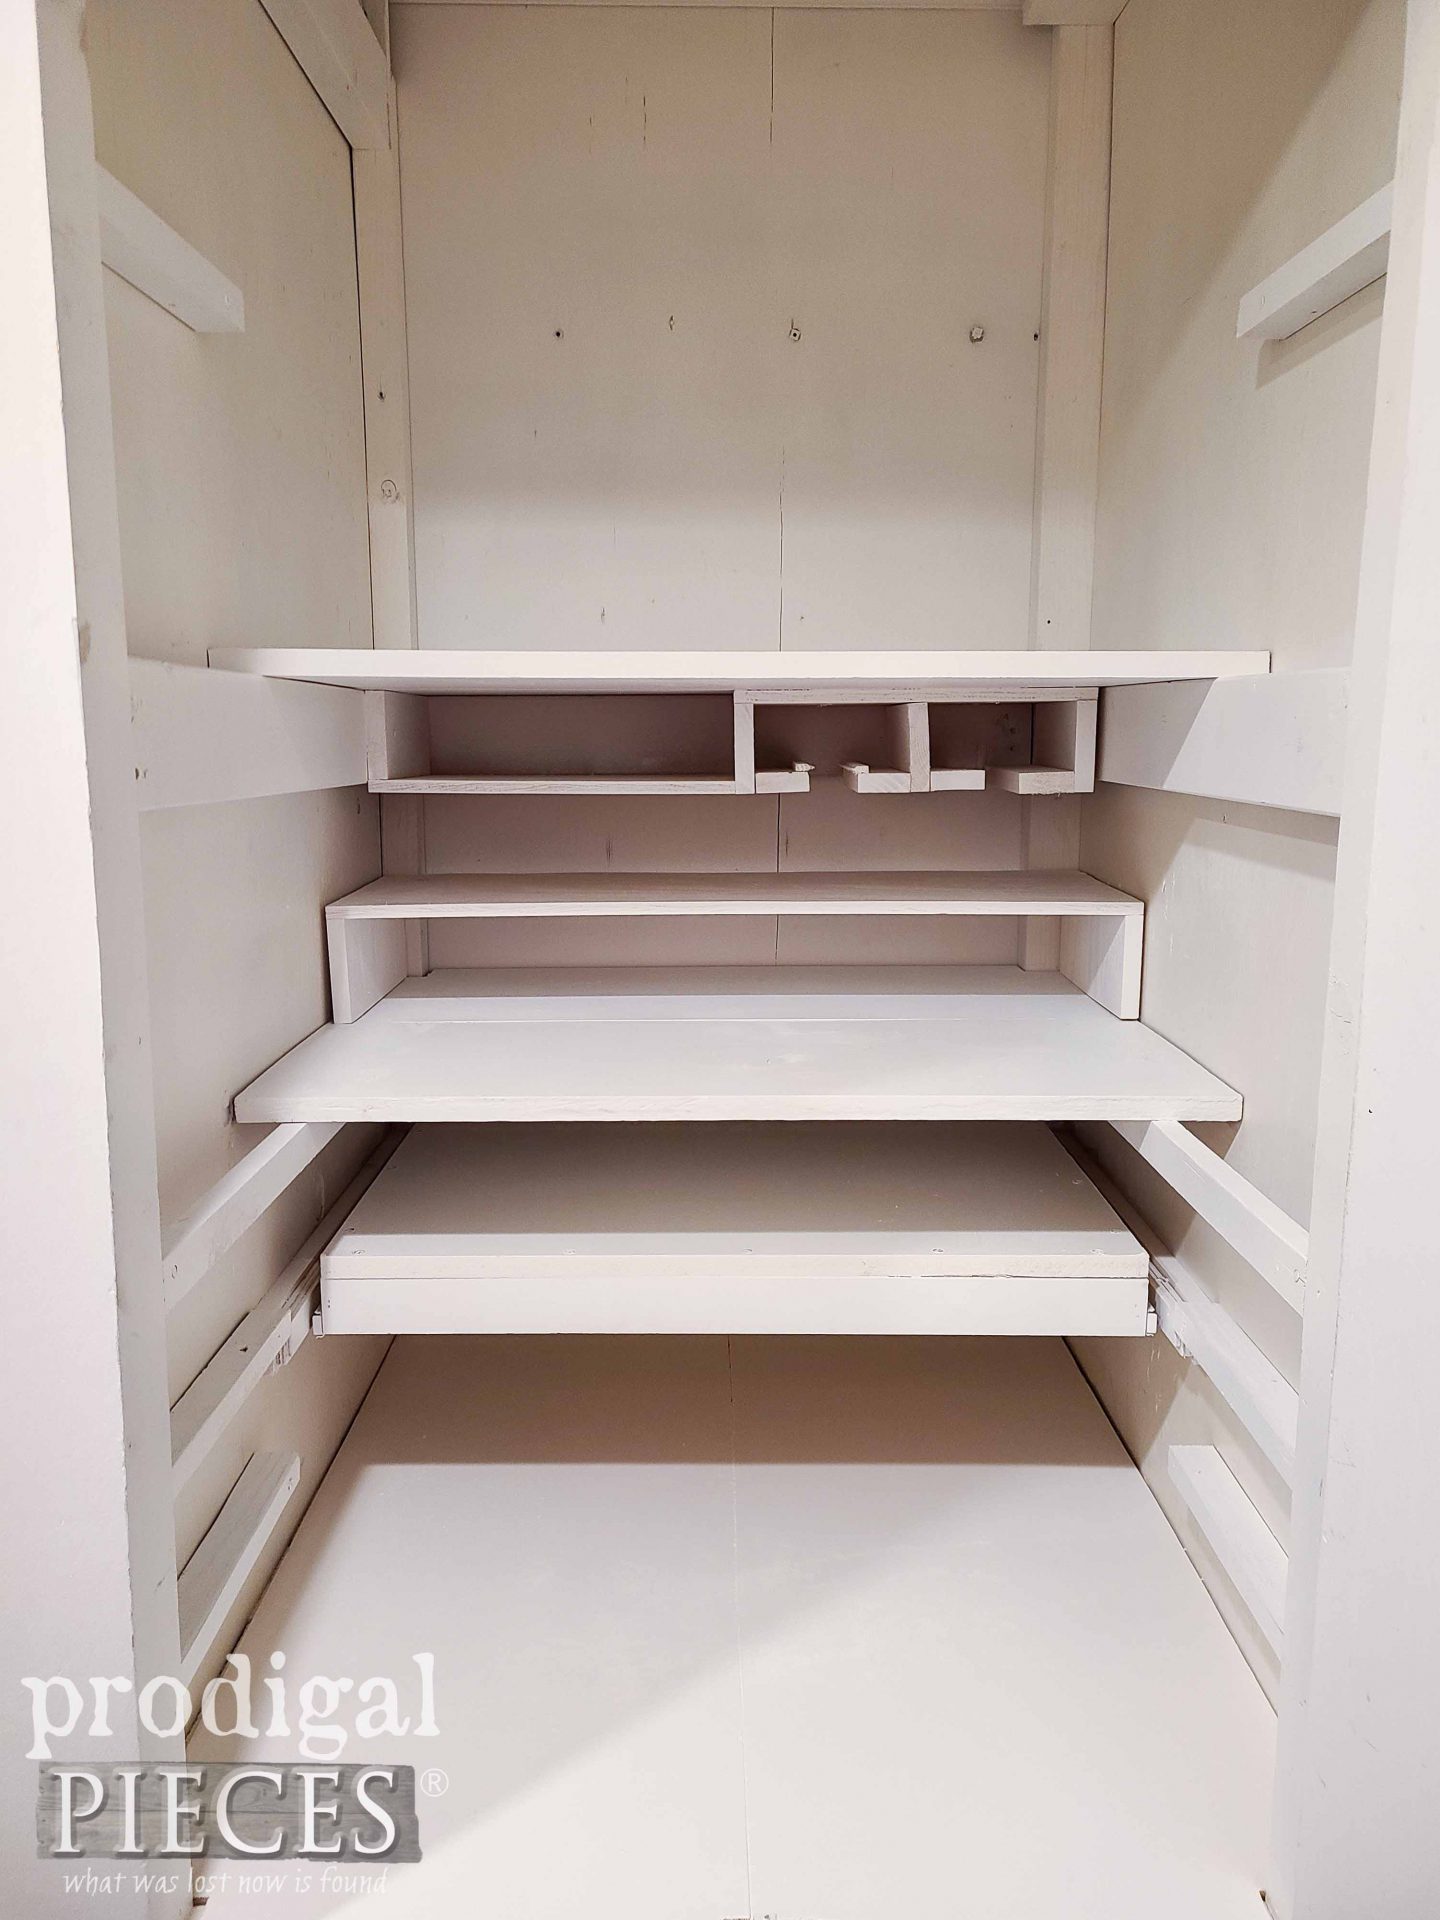 White Painted Closet Update by Larissa of Prodigal Pieces | prodigalpieces.com #prodigalpieces #diy #home